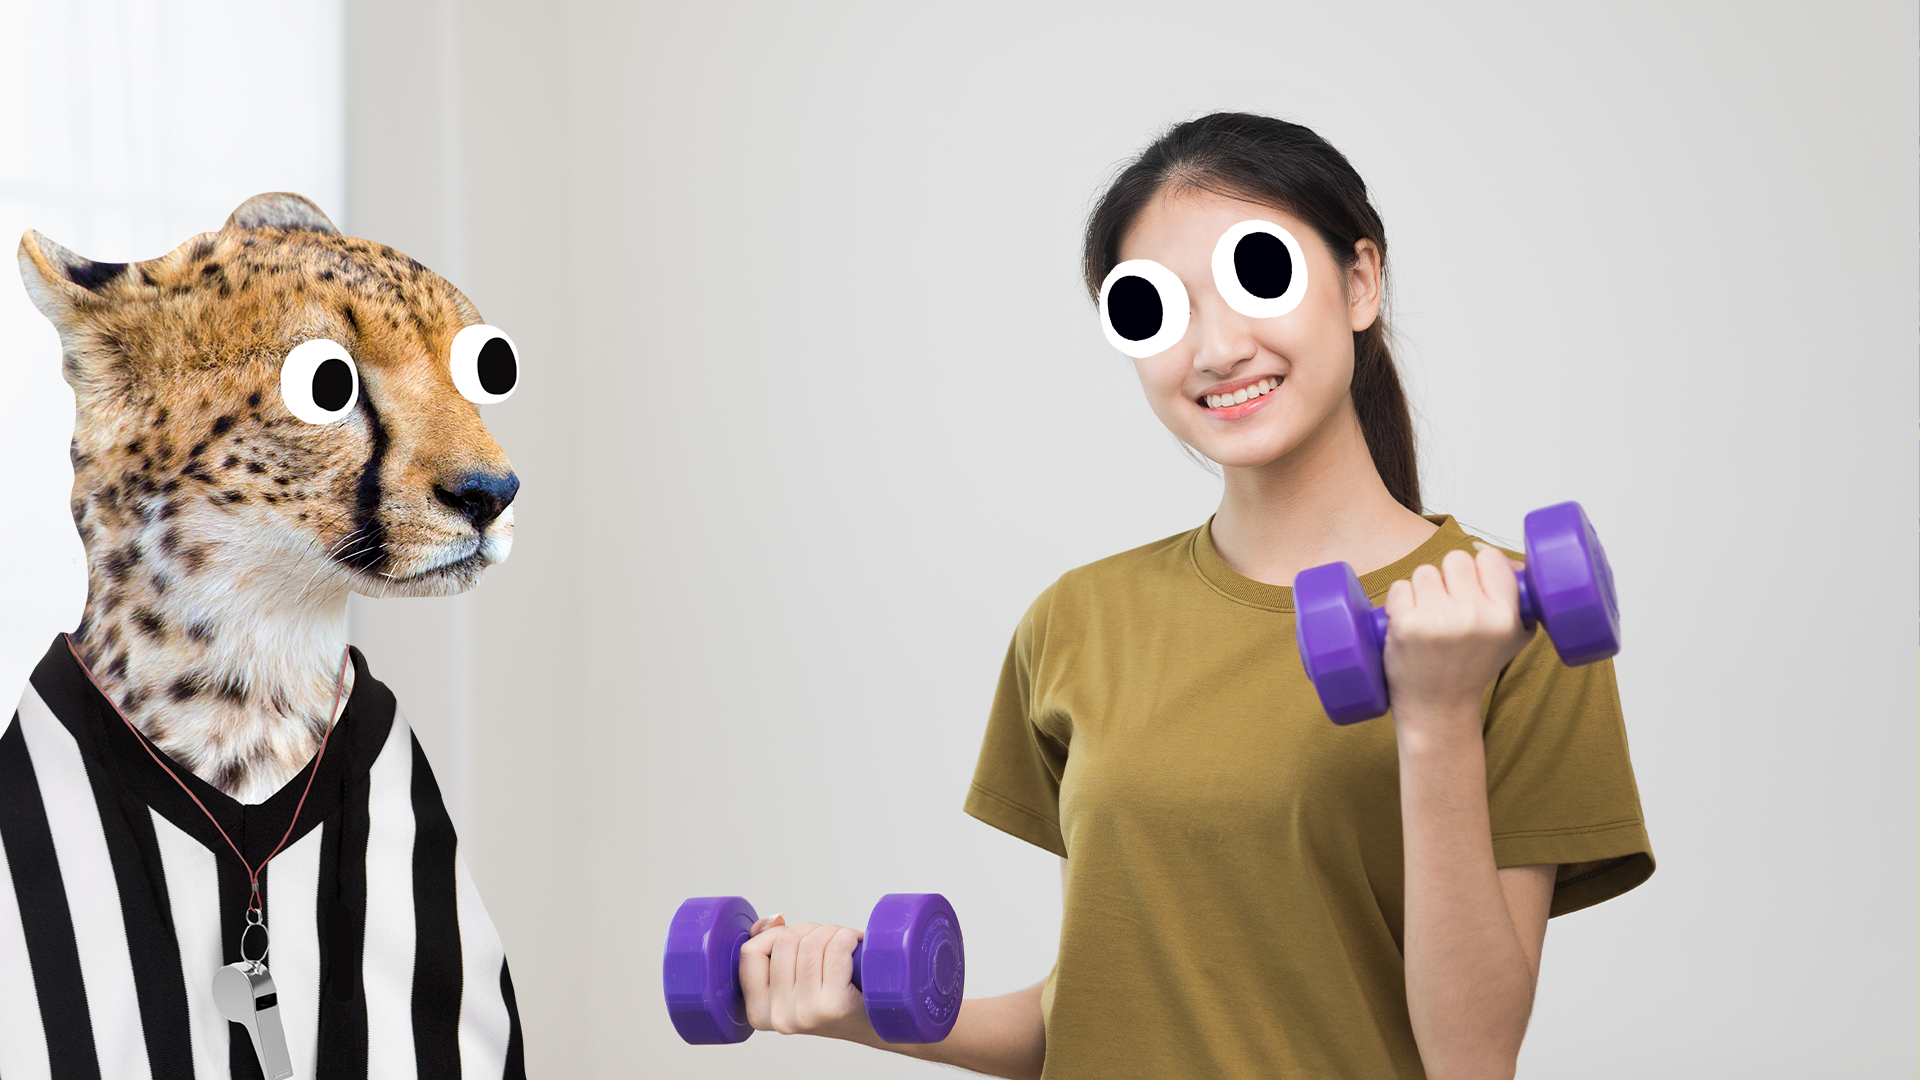 Woman working out and derpy cheetah referee 